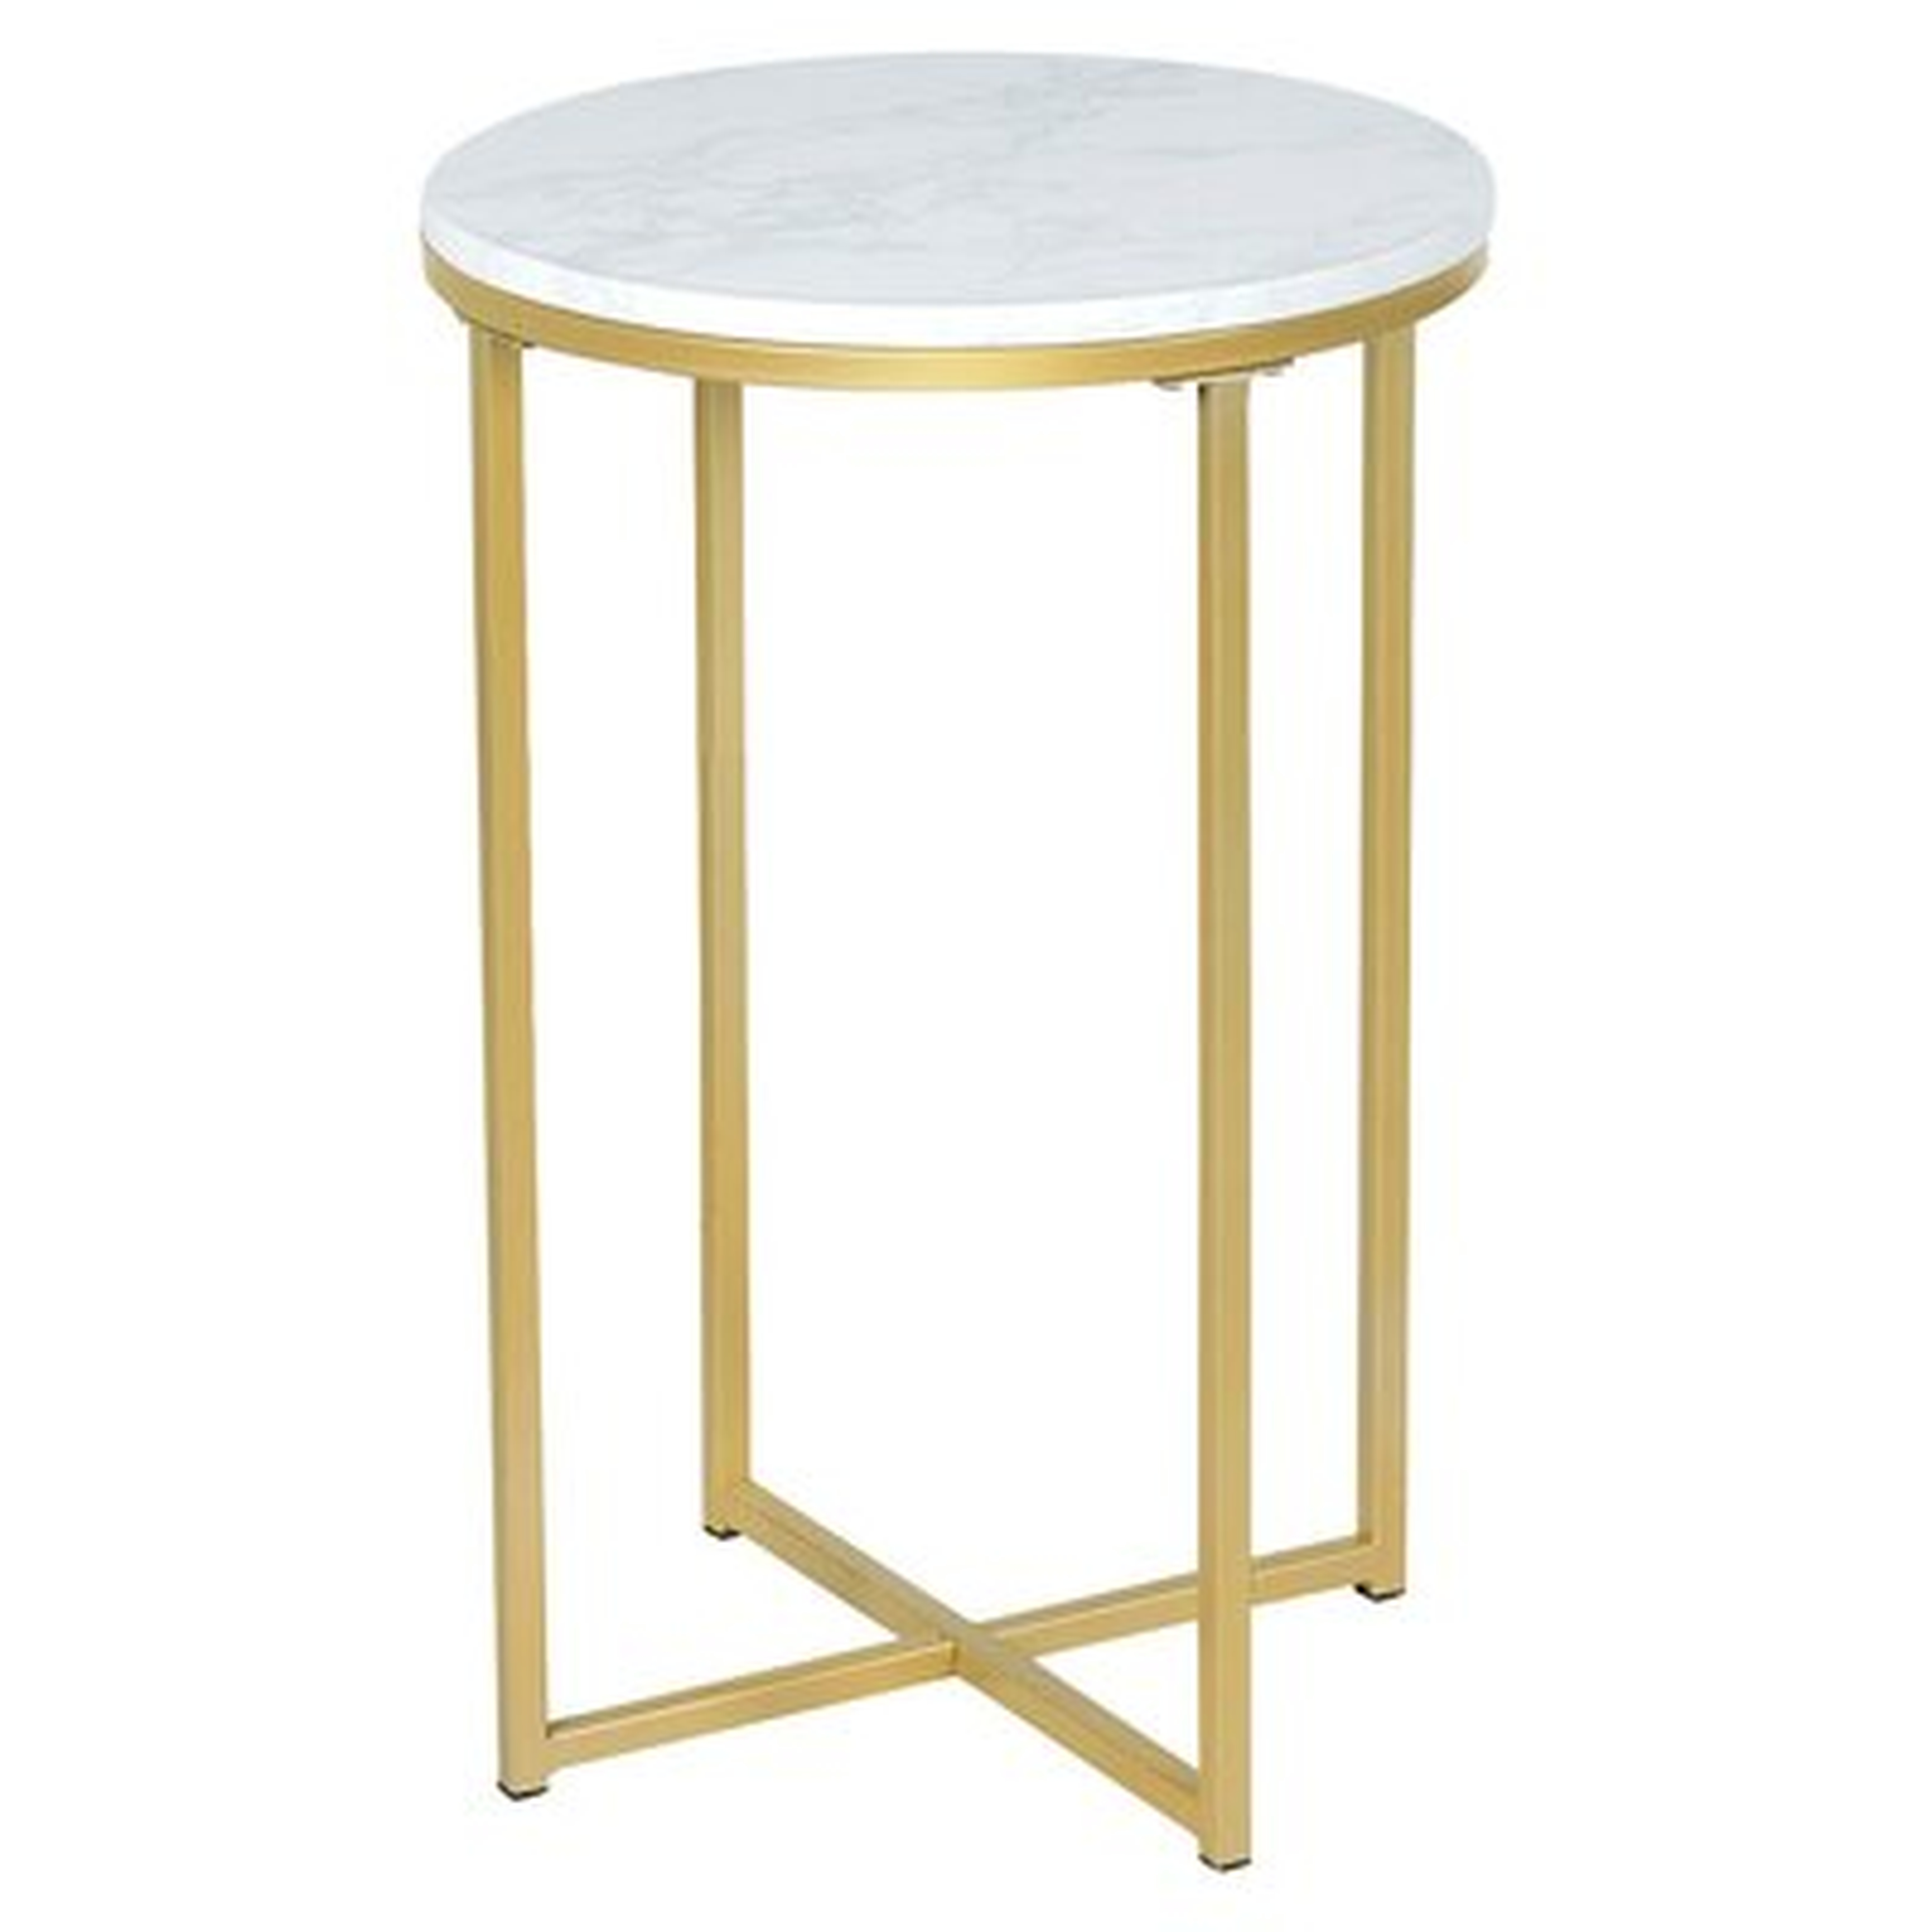 X-Shaped Marble Top Small Round Side Table End Table - Wayfair